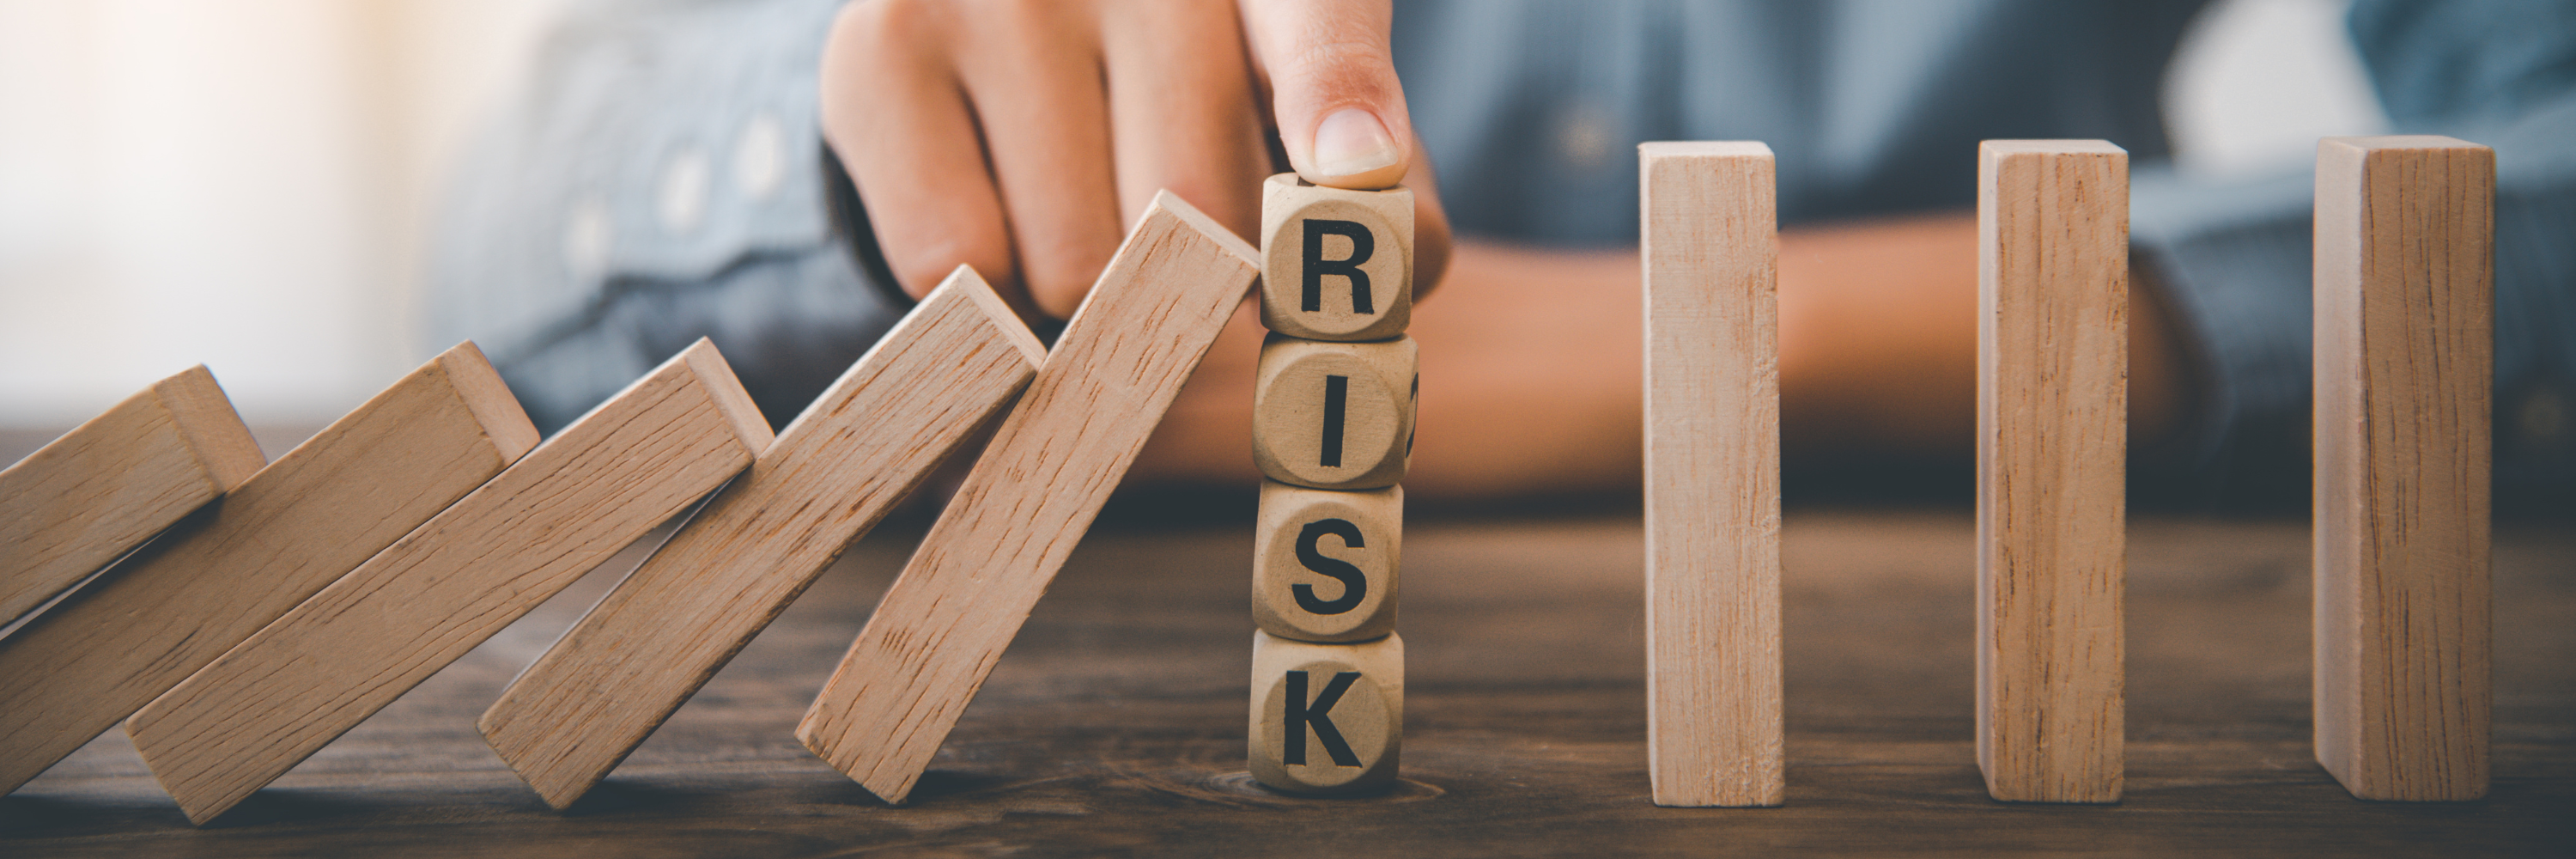 HR Risk Management: What to Look Out for In Uncertain Times